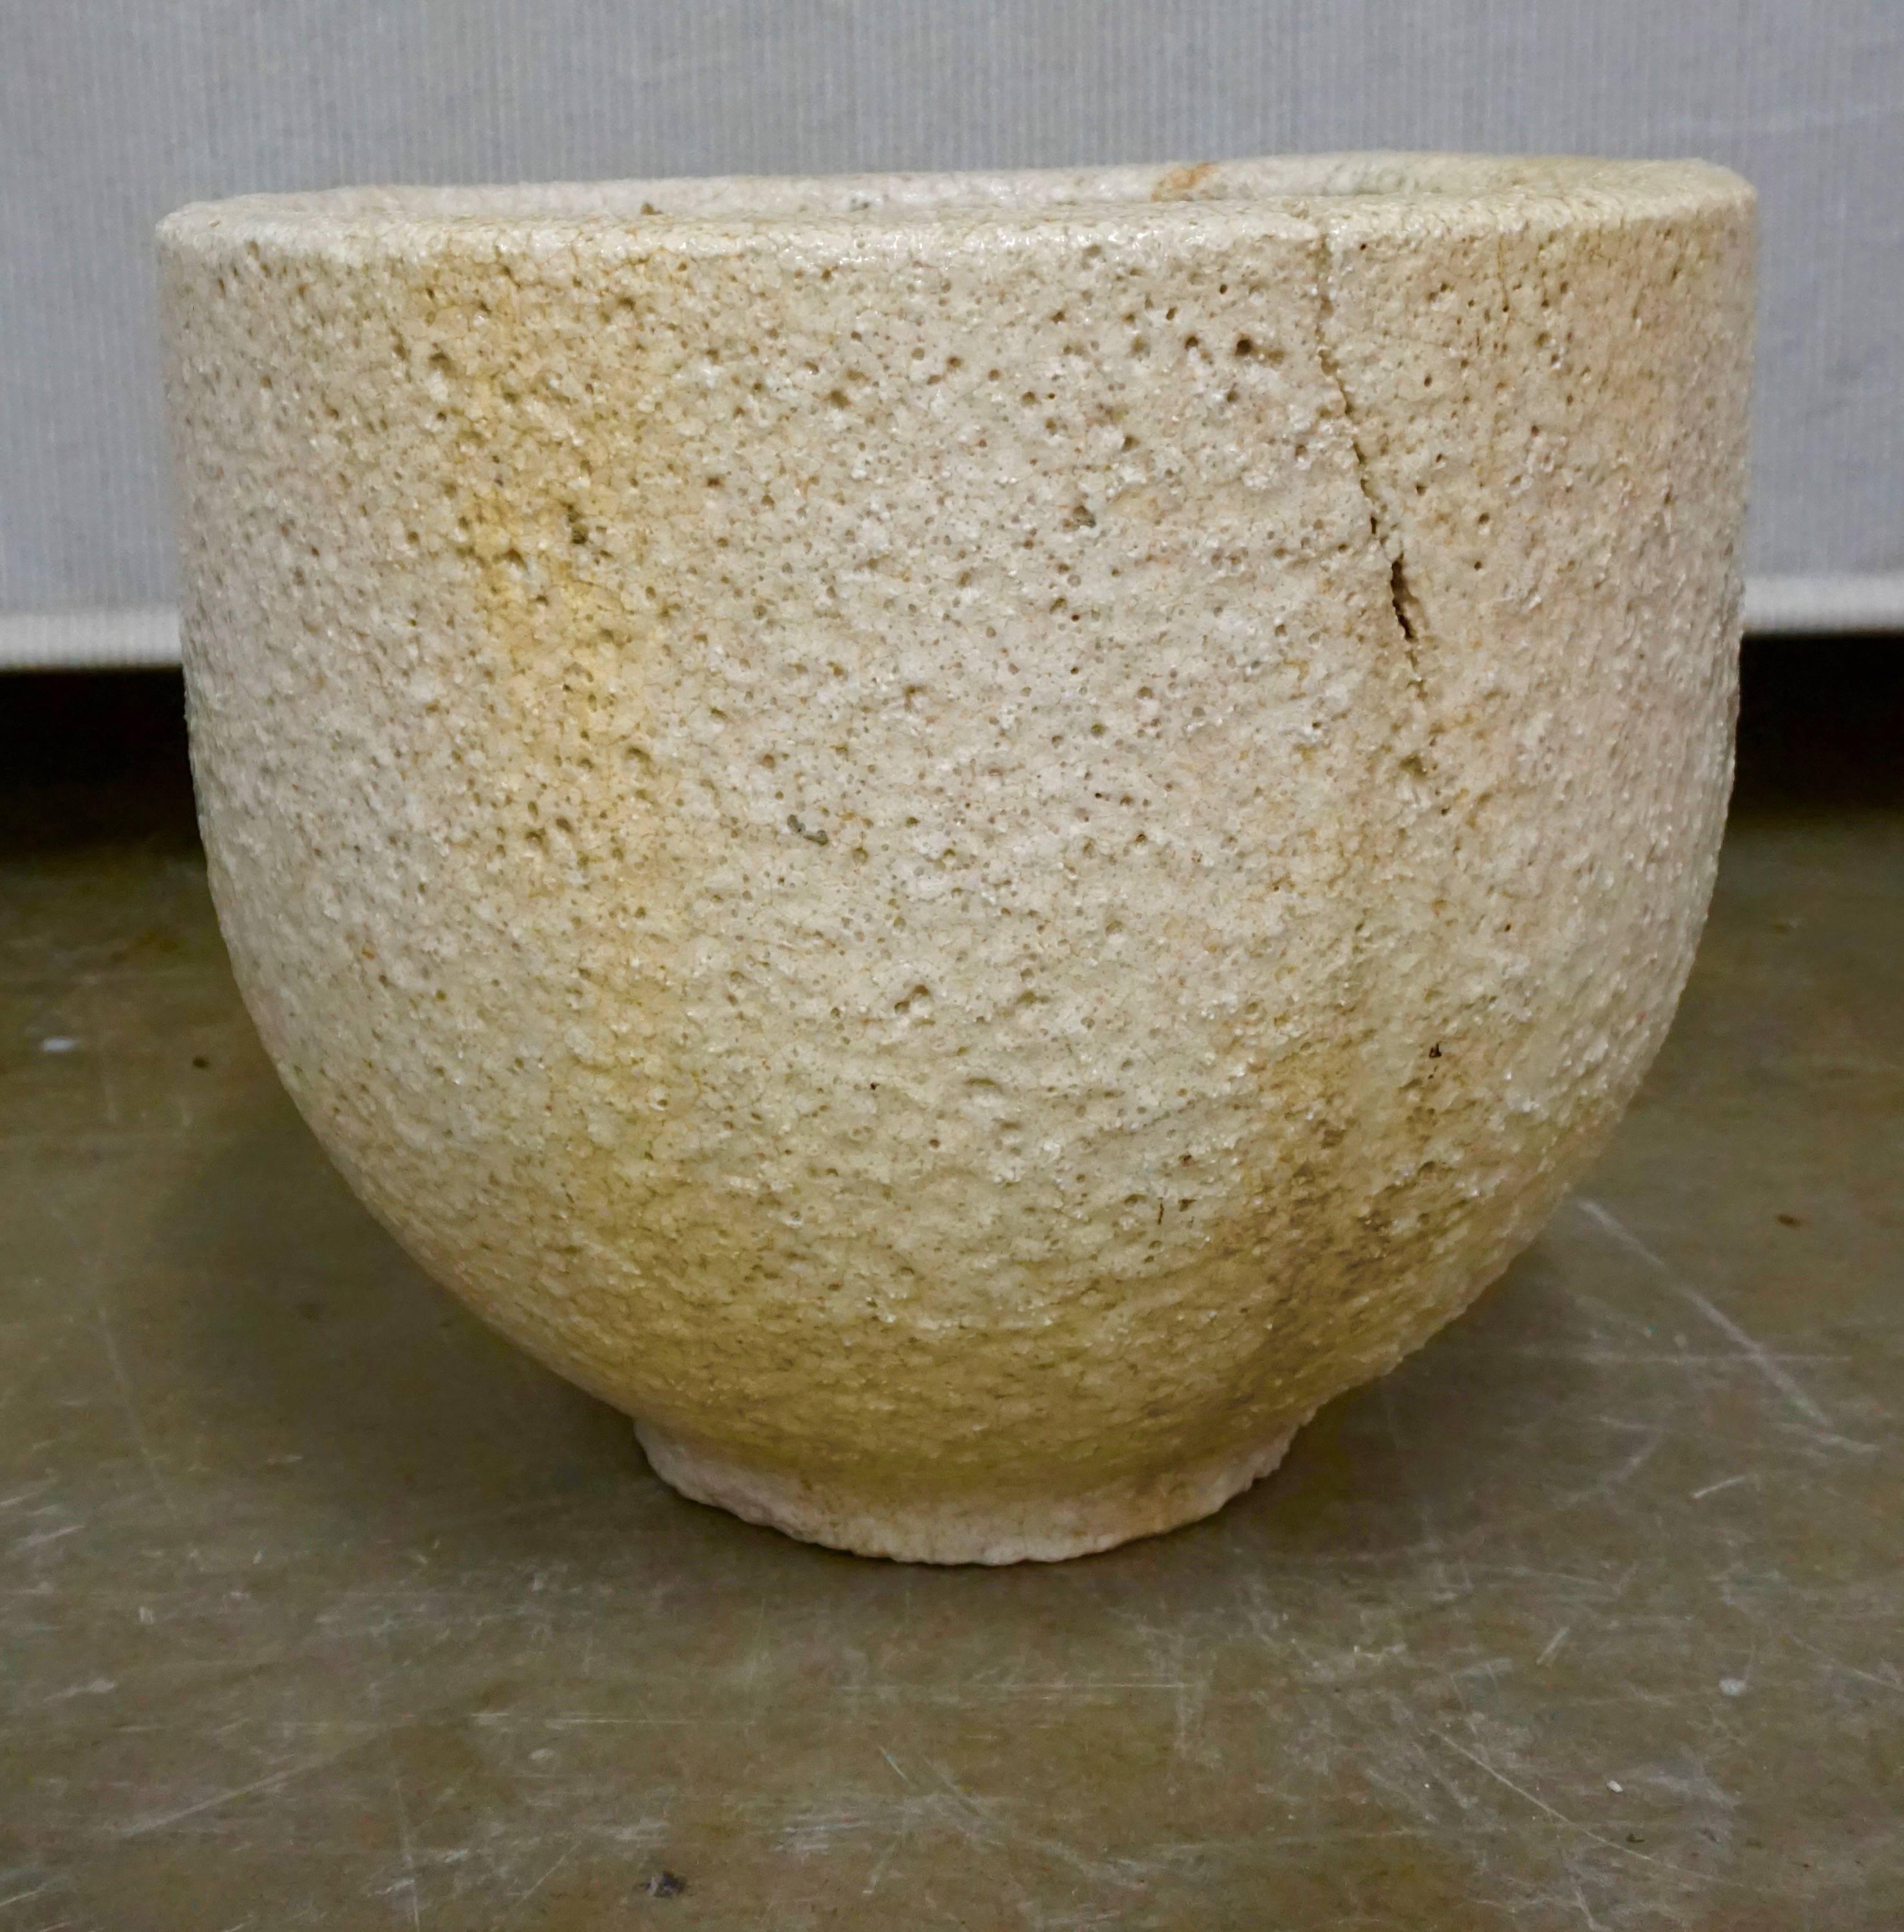 Ceramic vessel used to melt glass at very high temperatures. Enhanced by the crackling and the glass remnants and drippings. Can be used as a planter or decorative object, indoors or outdoors.
Multiple crucibles available.